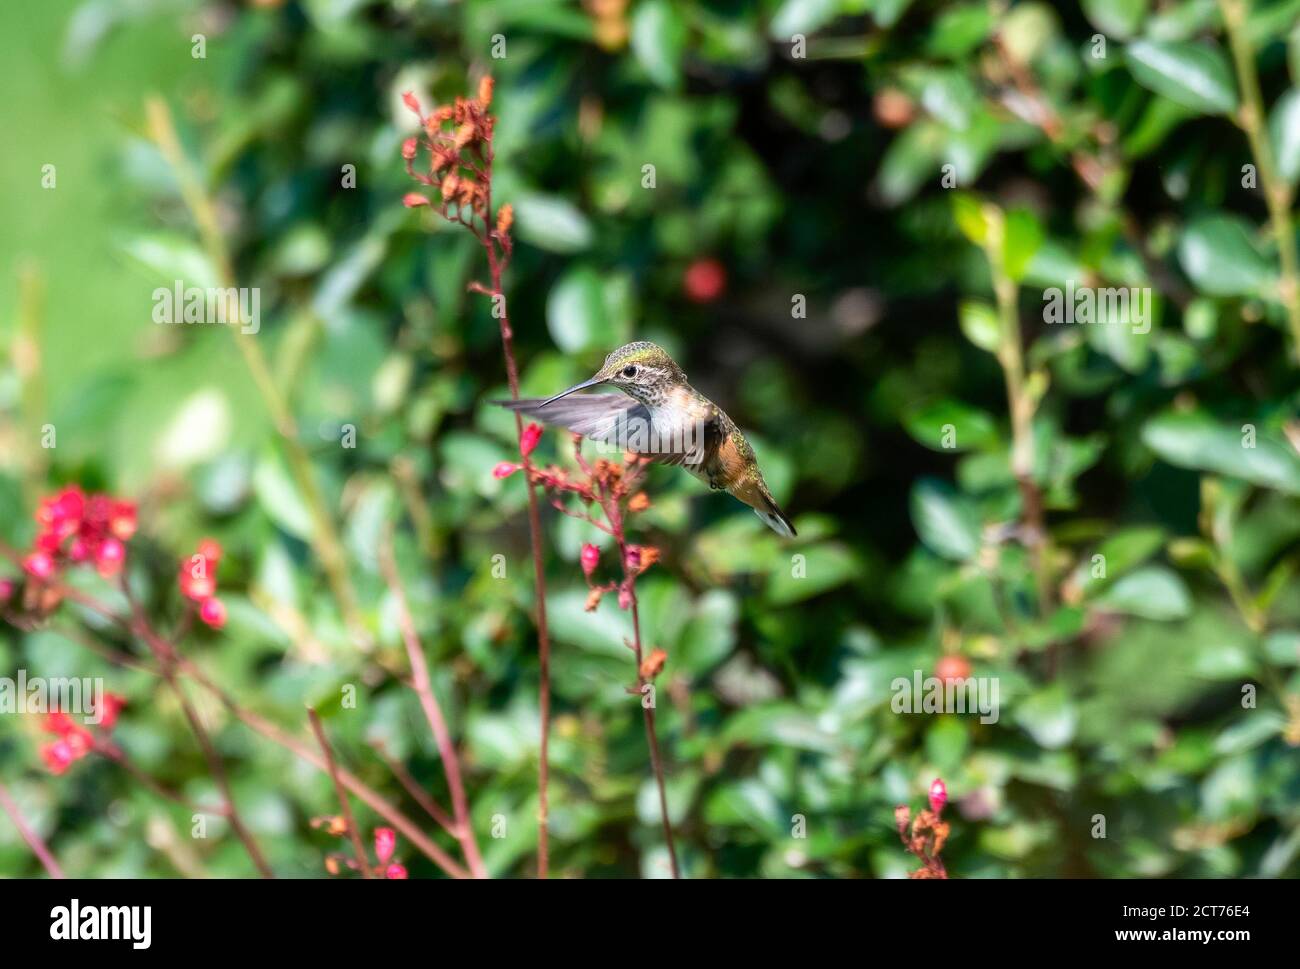 A Calliope Hummingbird (Selasphorus calliope) Drinks Nectar from Red Coral Bell Flowers (Heuchera) During Migration in an Urban Backyard in Colorado Stock Photo